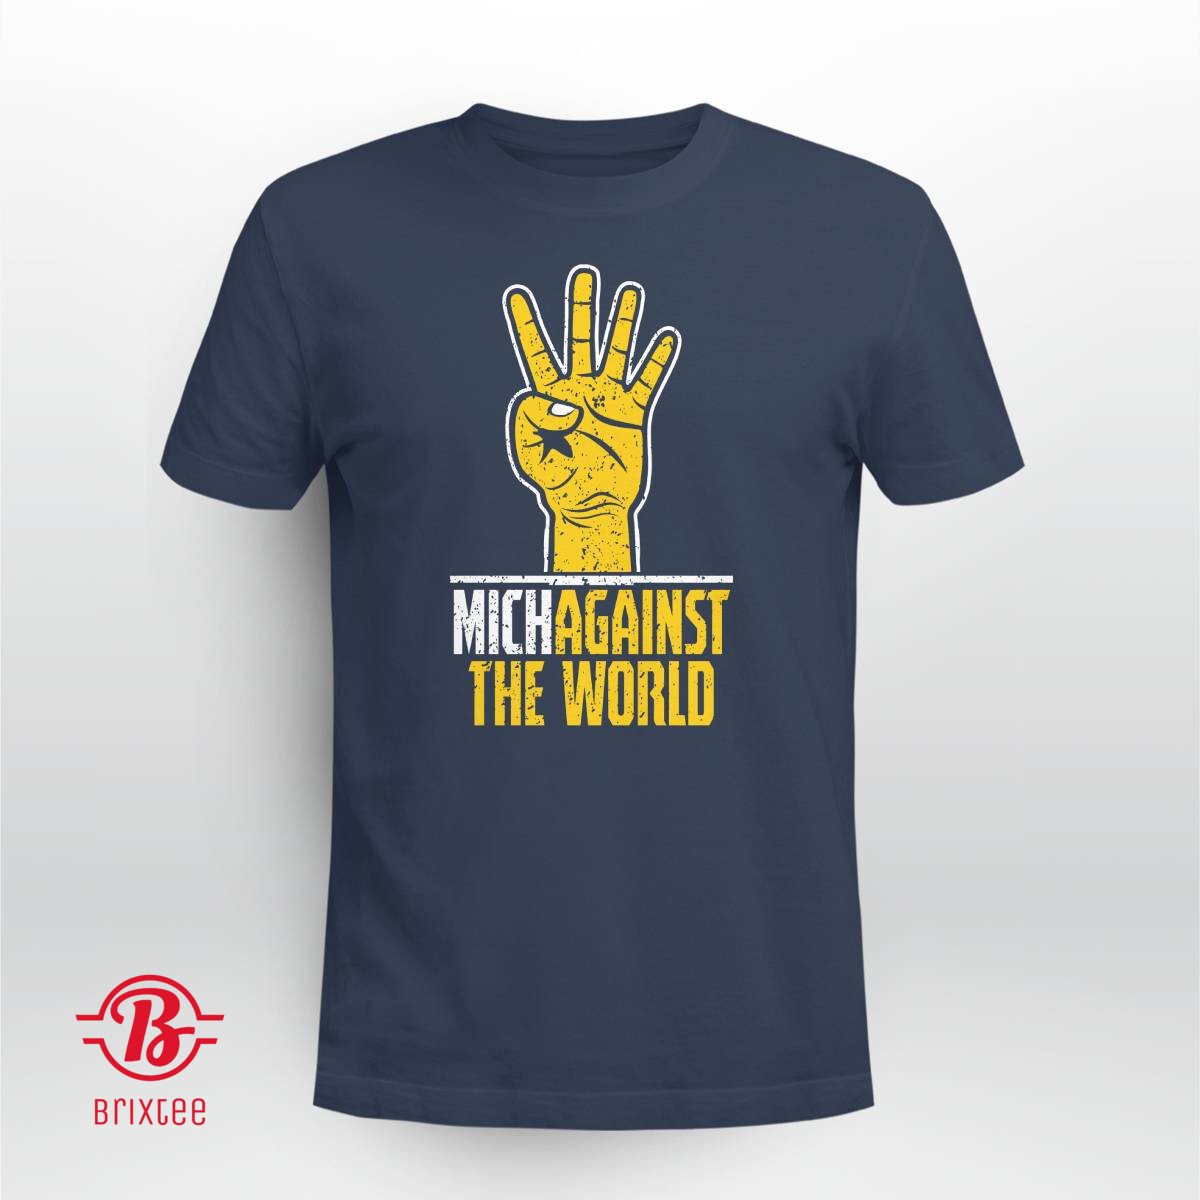 Michagainst the World - Michigan Against the World